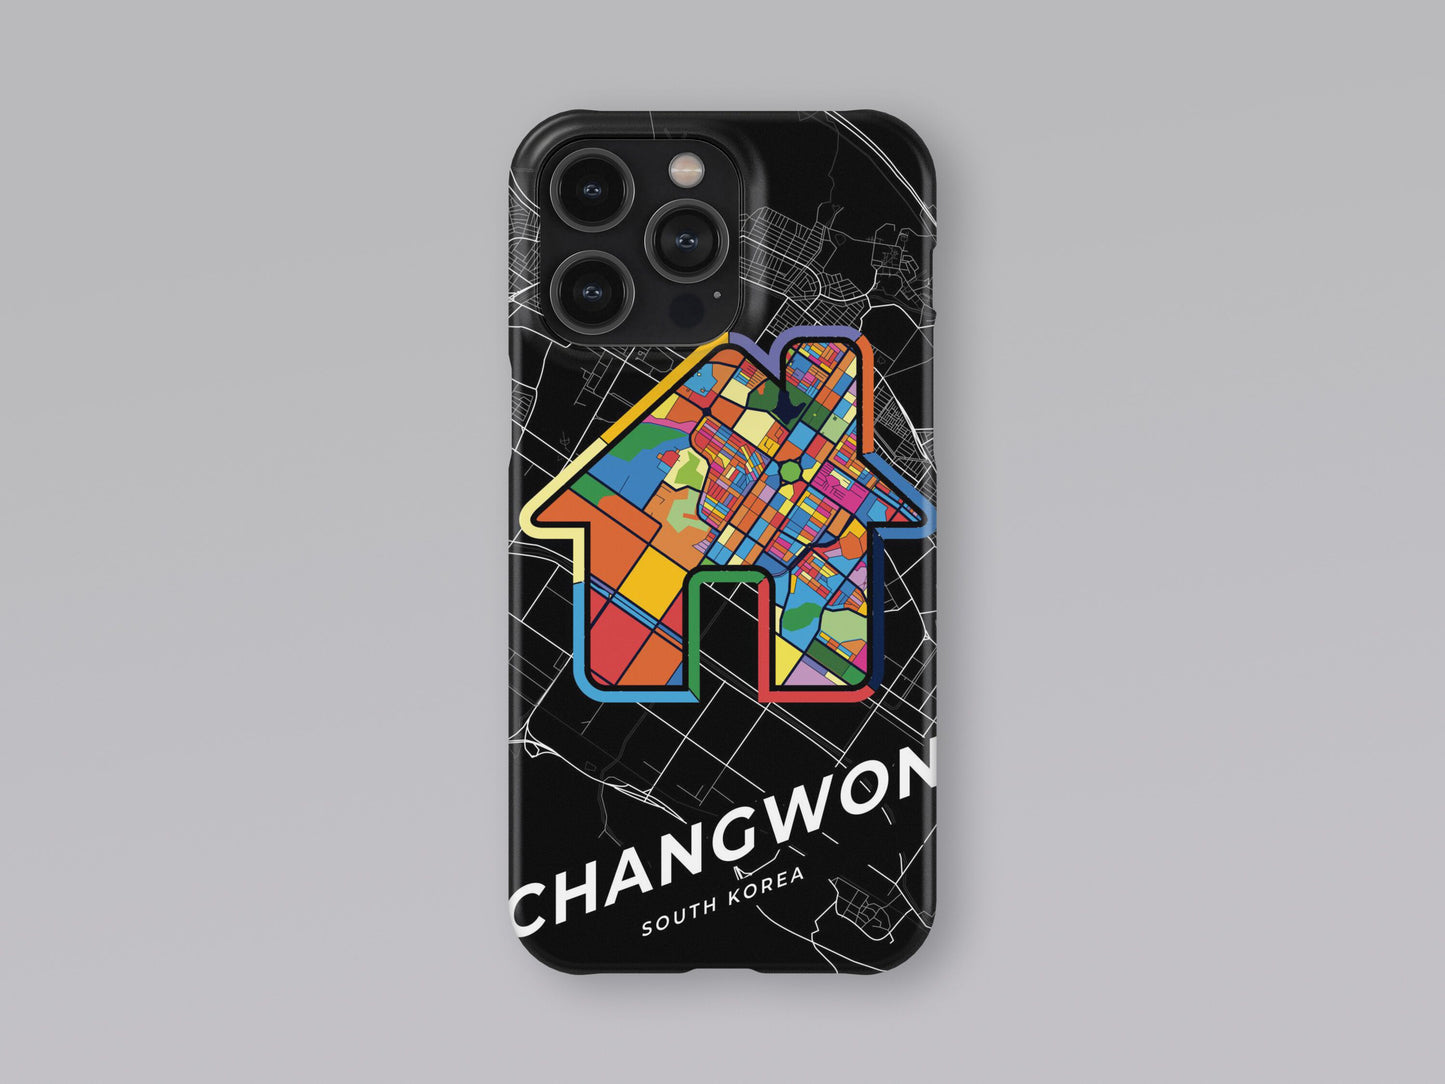 Changwon South Korea slim phone case with colorful icon. Birthday, wedding or housewarming gift. Couple match cases. 3